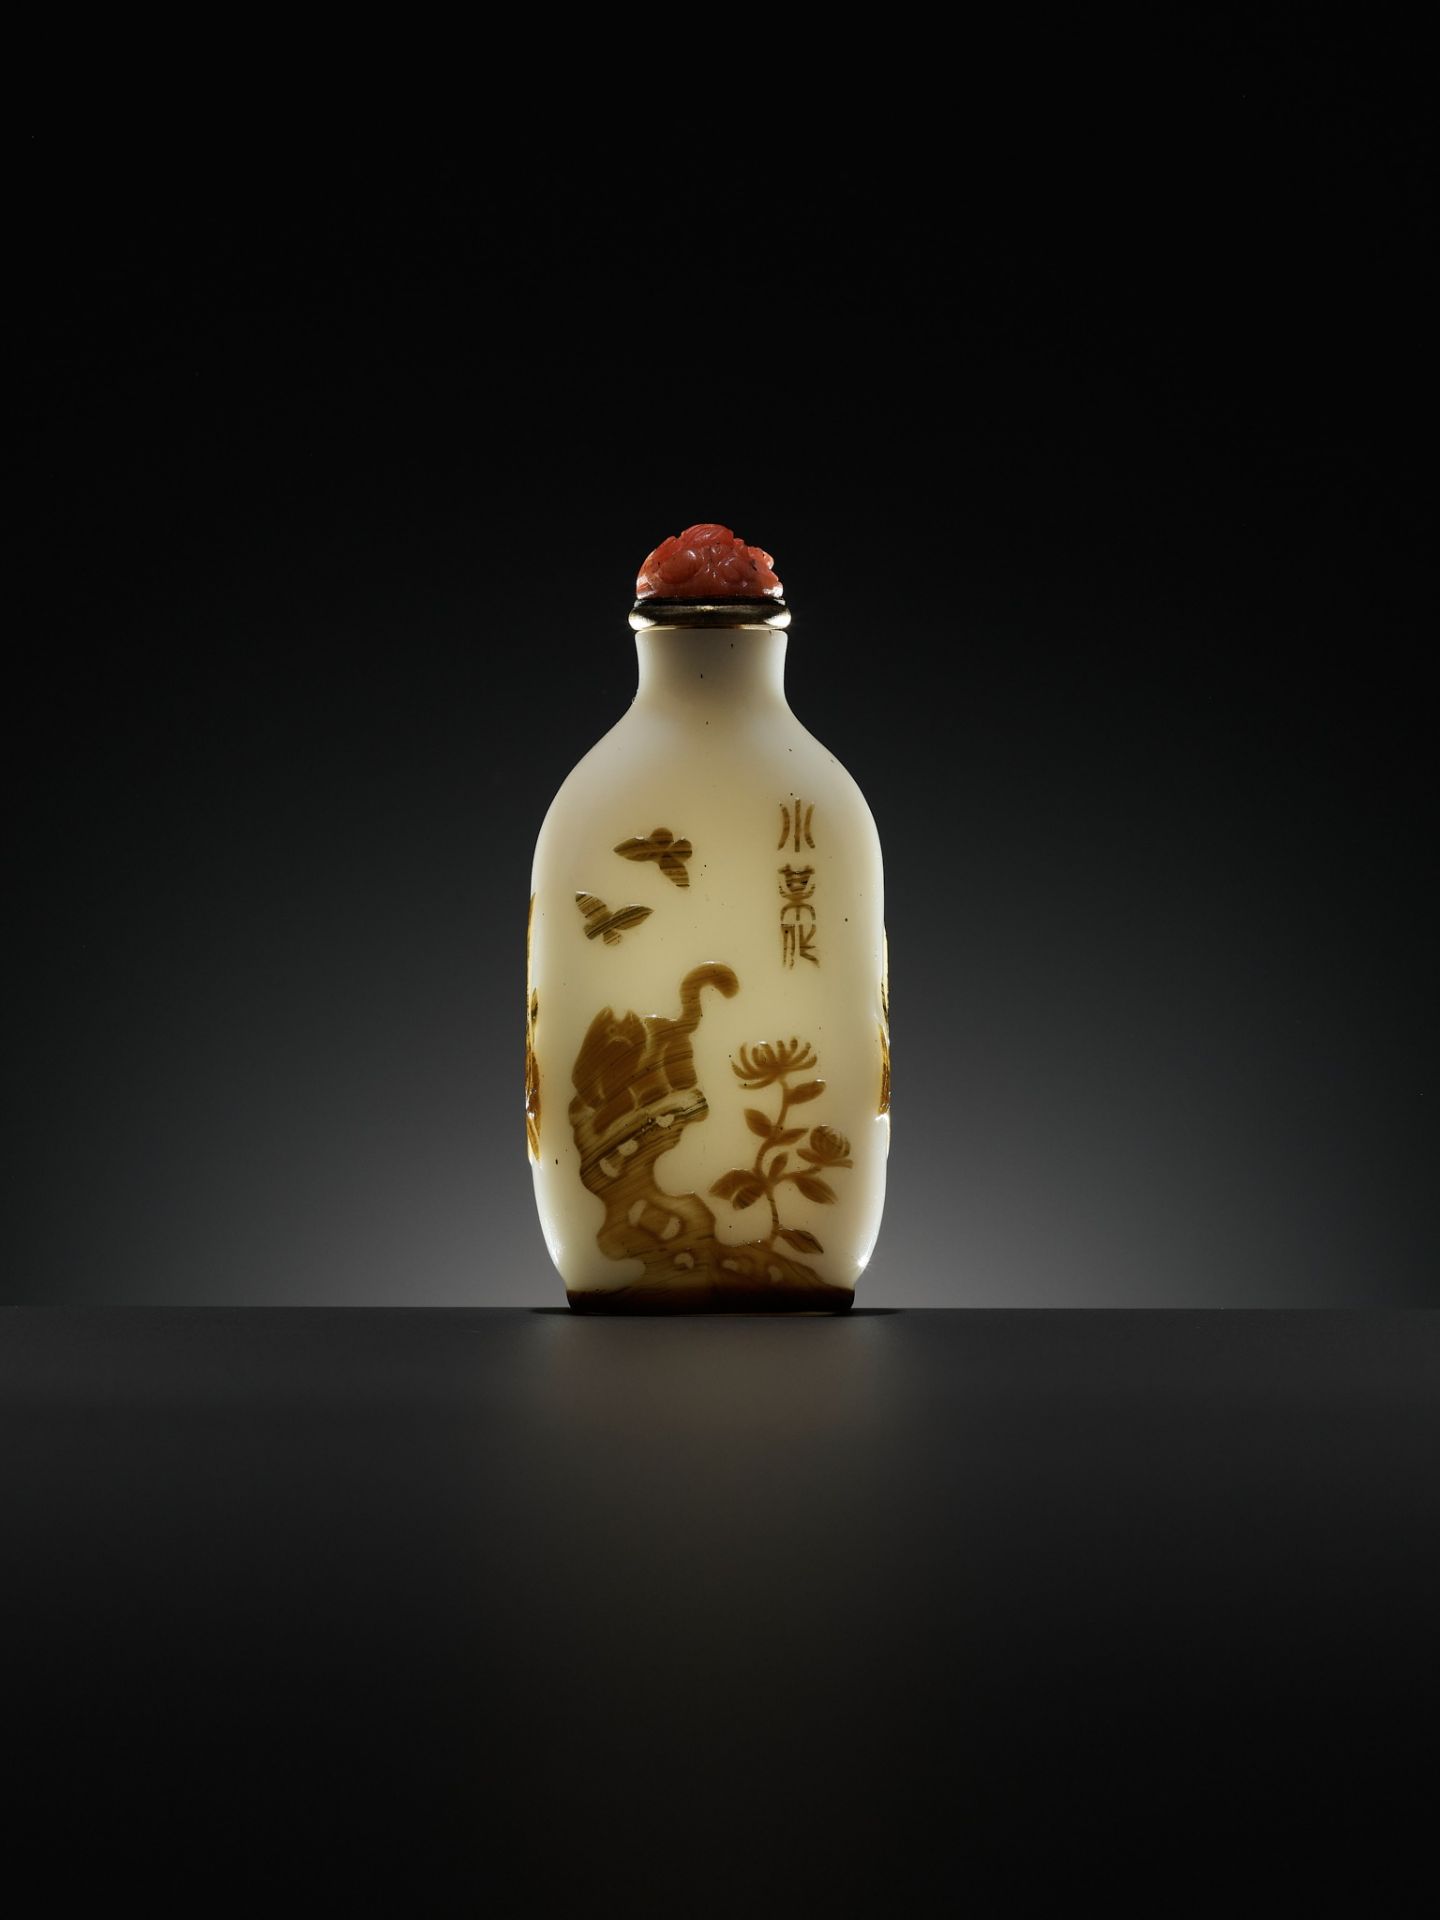 AN INSCRIBED OVERLAY GLASS ‘CAT AND BUTTERFLY’ SNUFF BOTTLE, BY WANG SU, YANGZHOU SCHOOL, 1820-1840 - Image 2 of 19